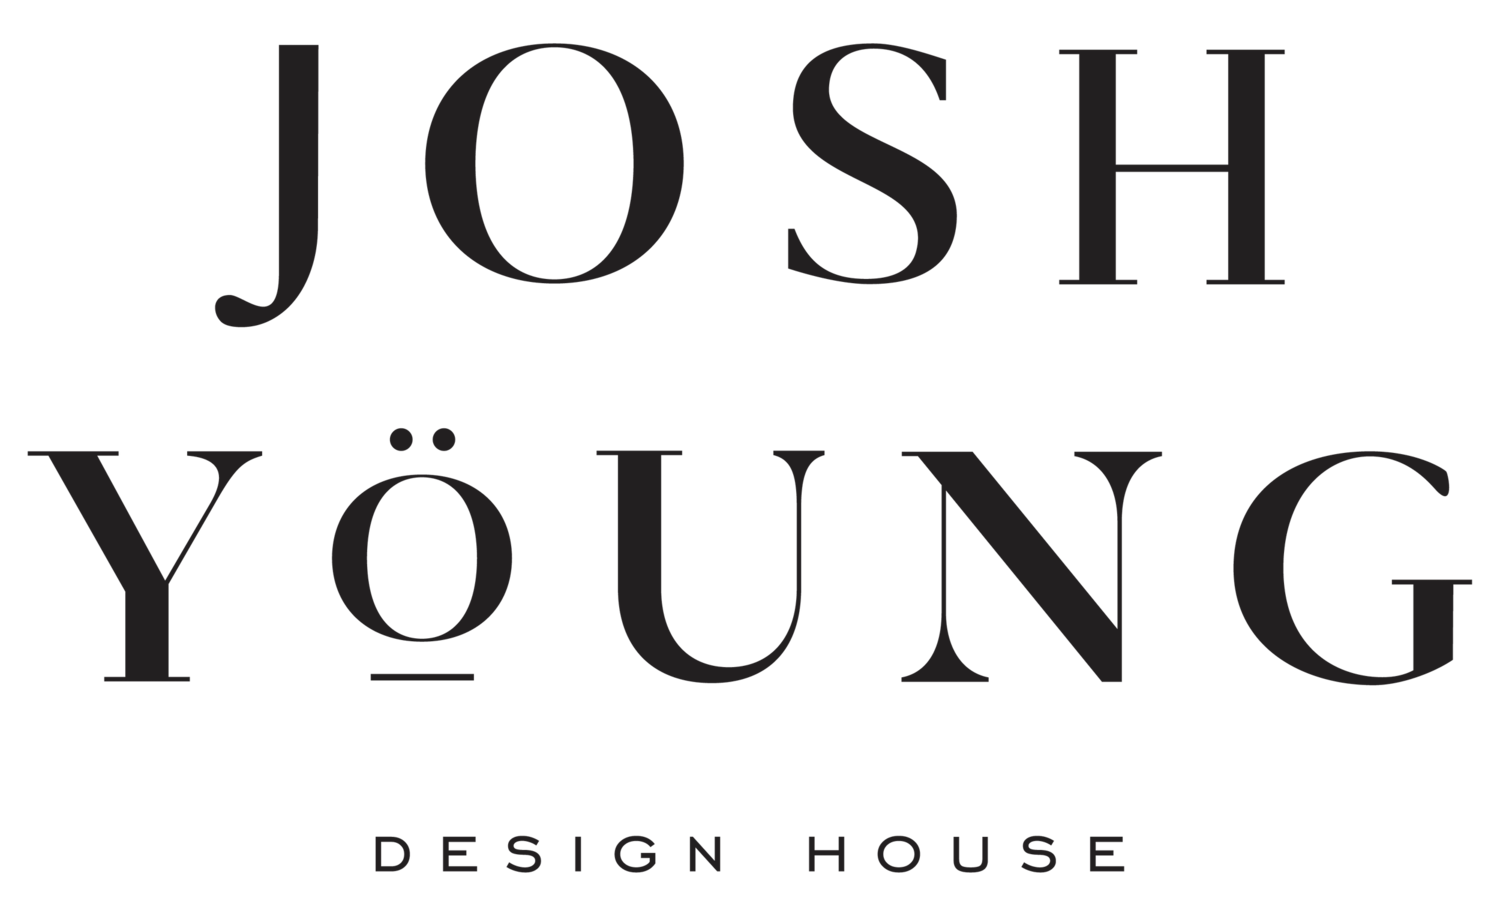 Josh Young Design House